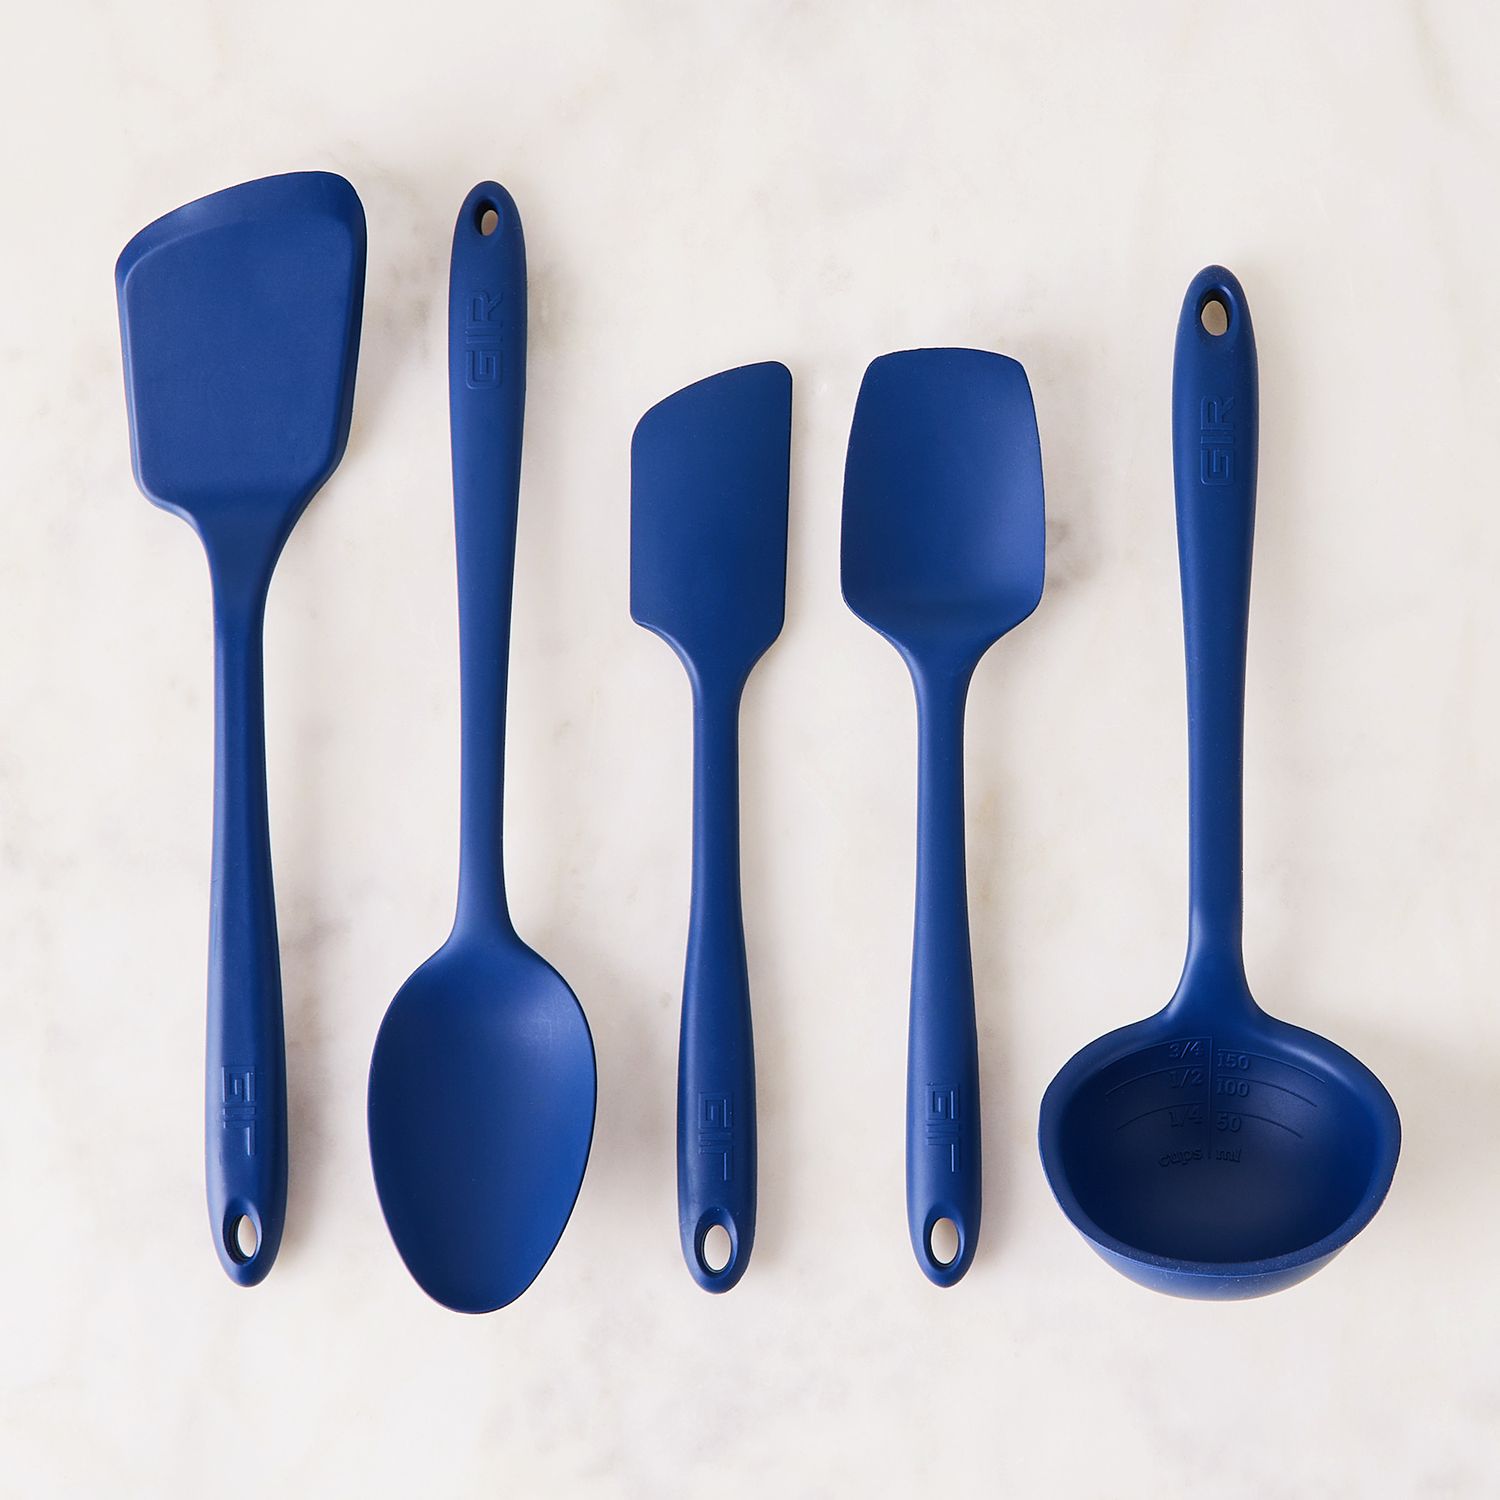 Zulay Kitchen Silicone Utensils Set 5 pcs - Blue, 1 - Foods Co.